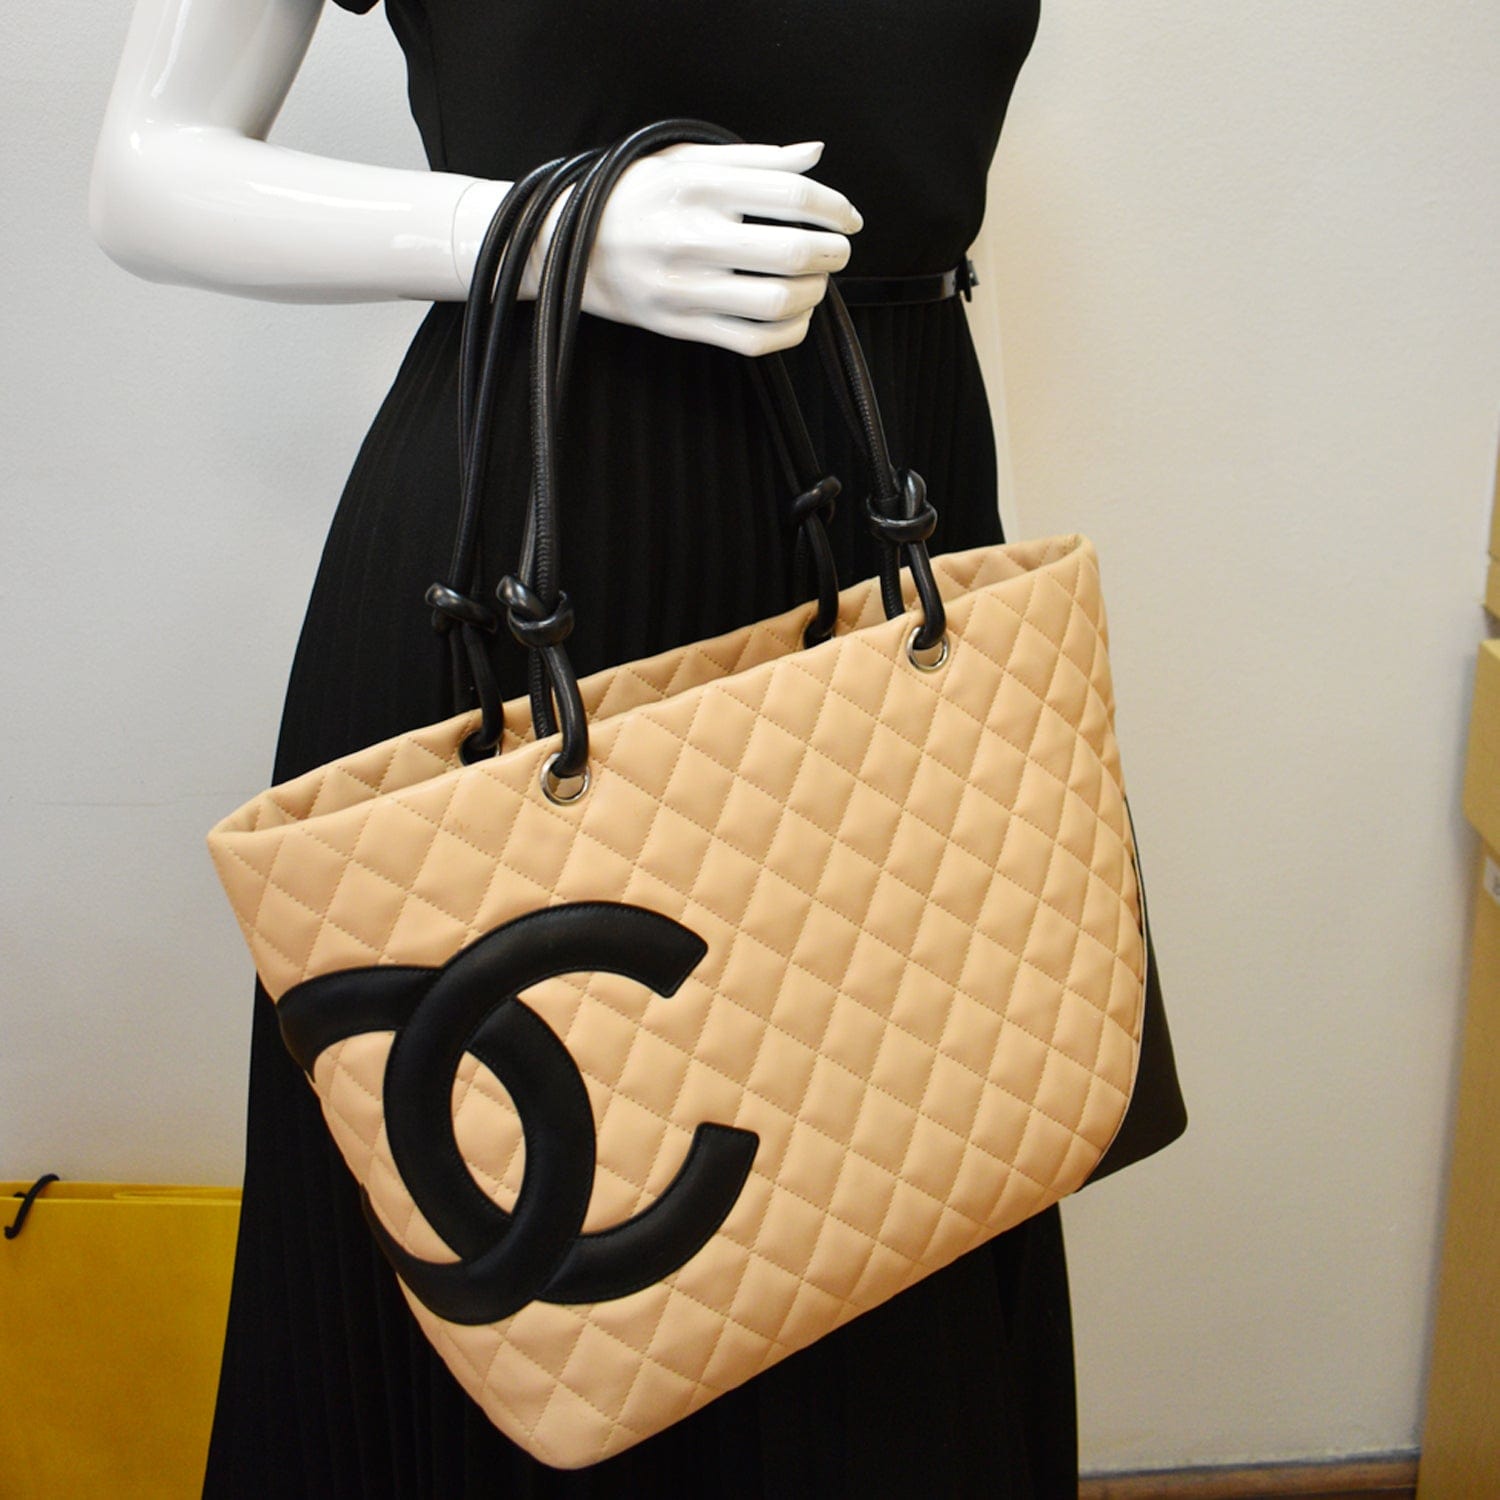 This Chanel combon ligne tote was my obsession #greenscreen